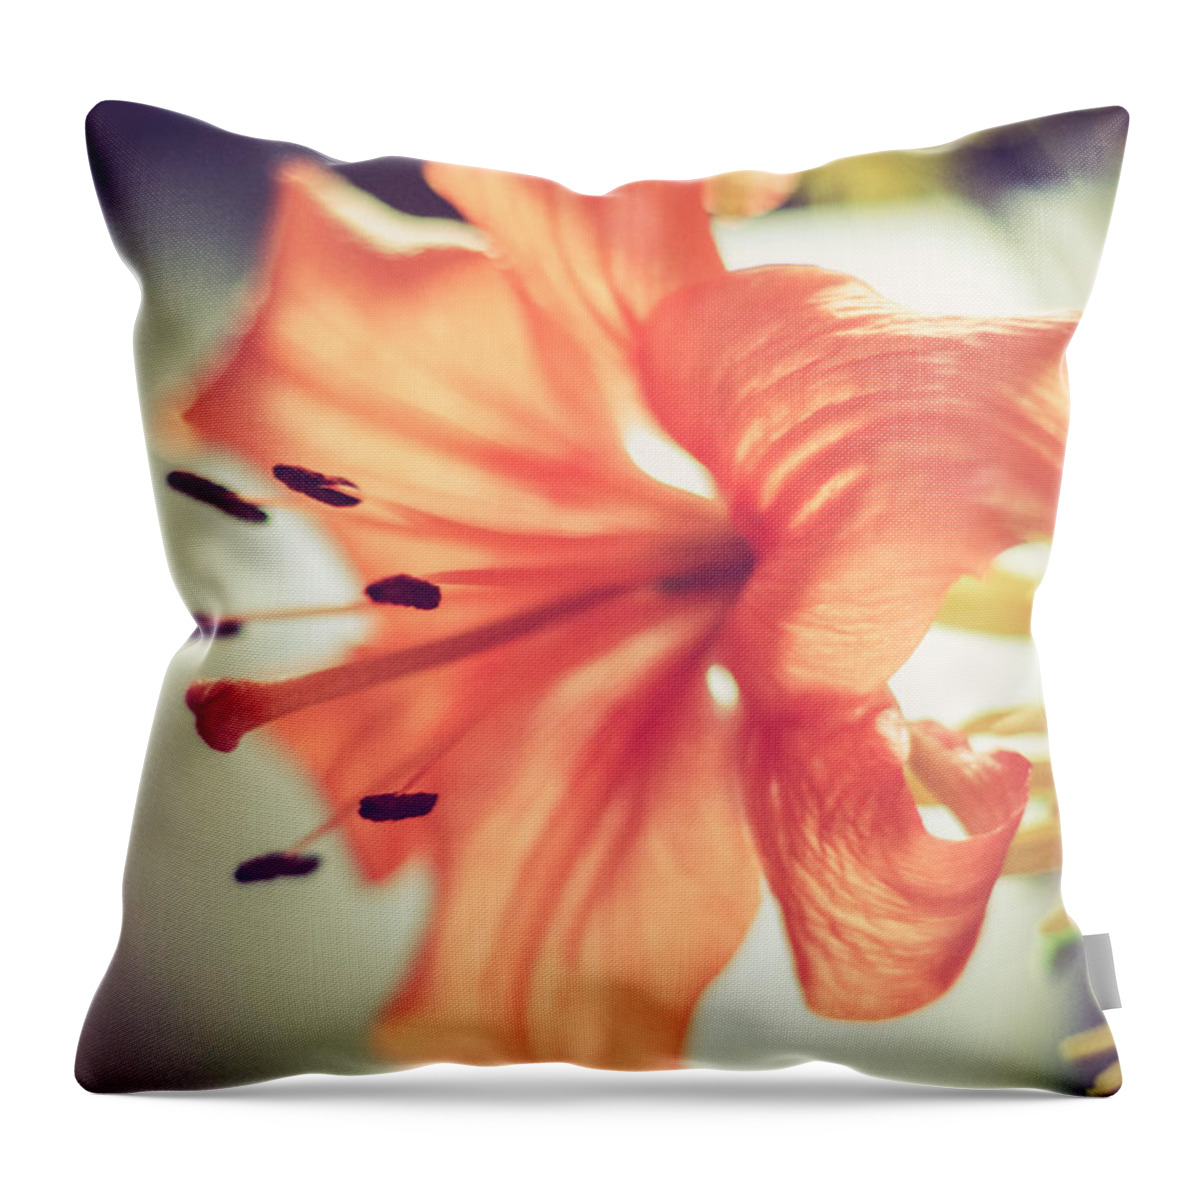 Orange Throw Pillow featuring the photograph Scent of Spring by Viviana Nadowski